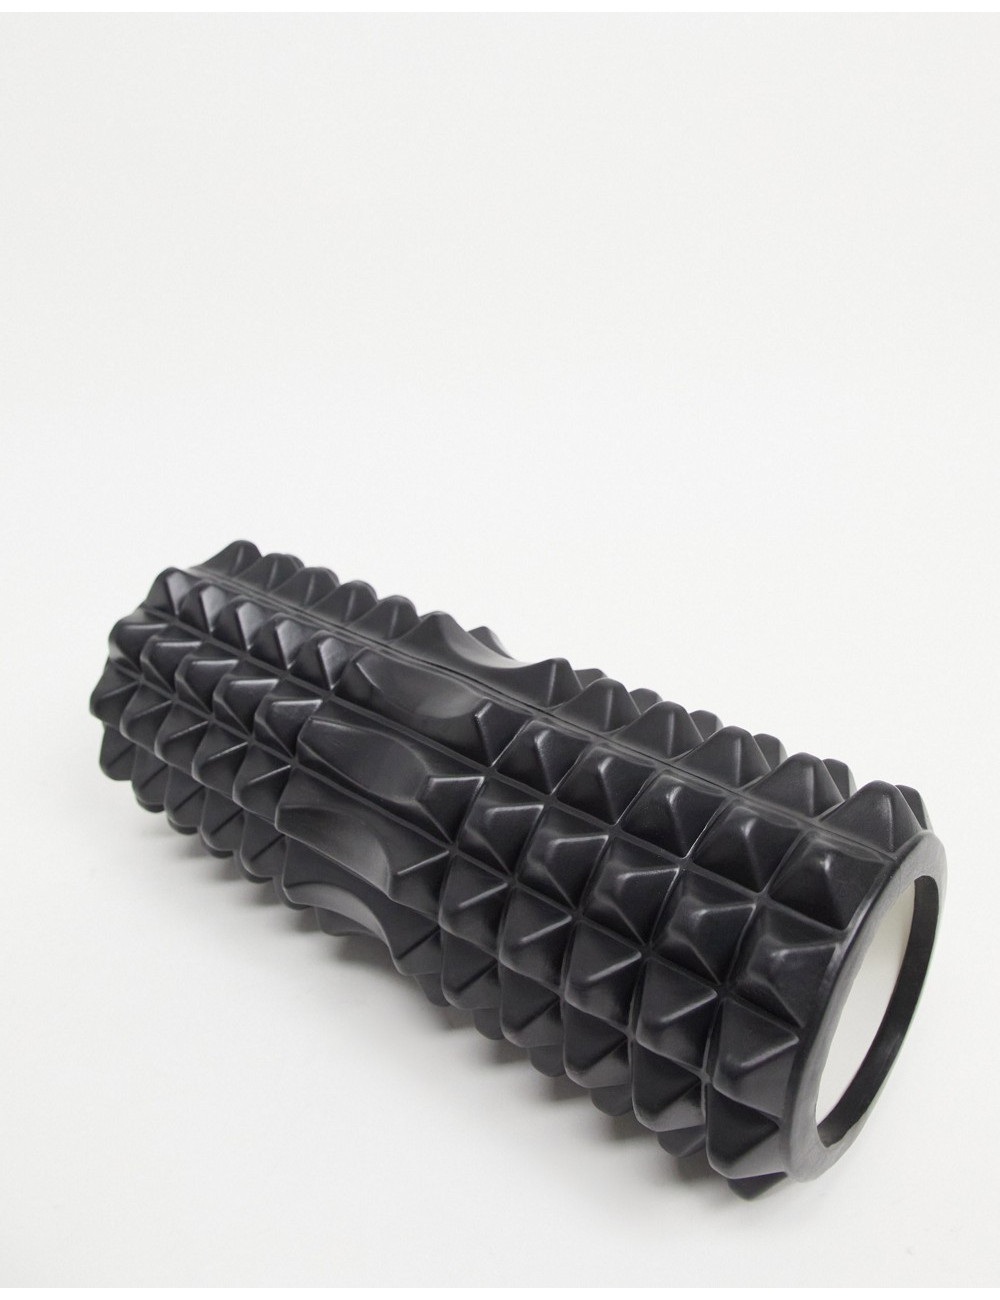 FitHut foam roller with...